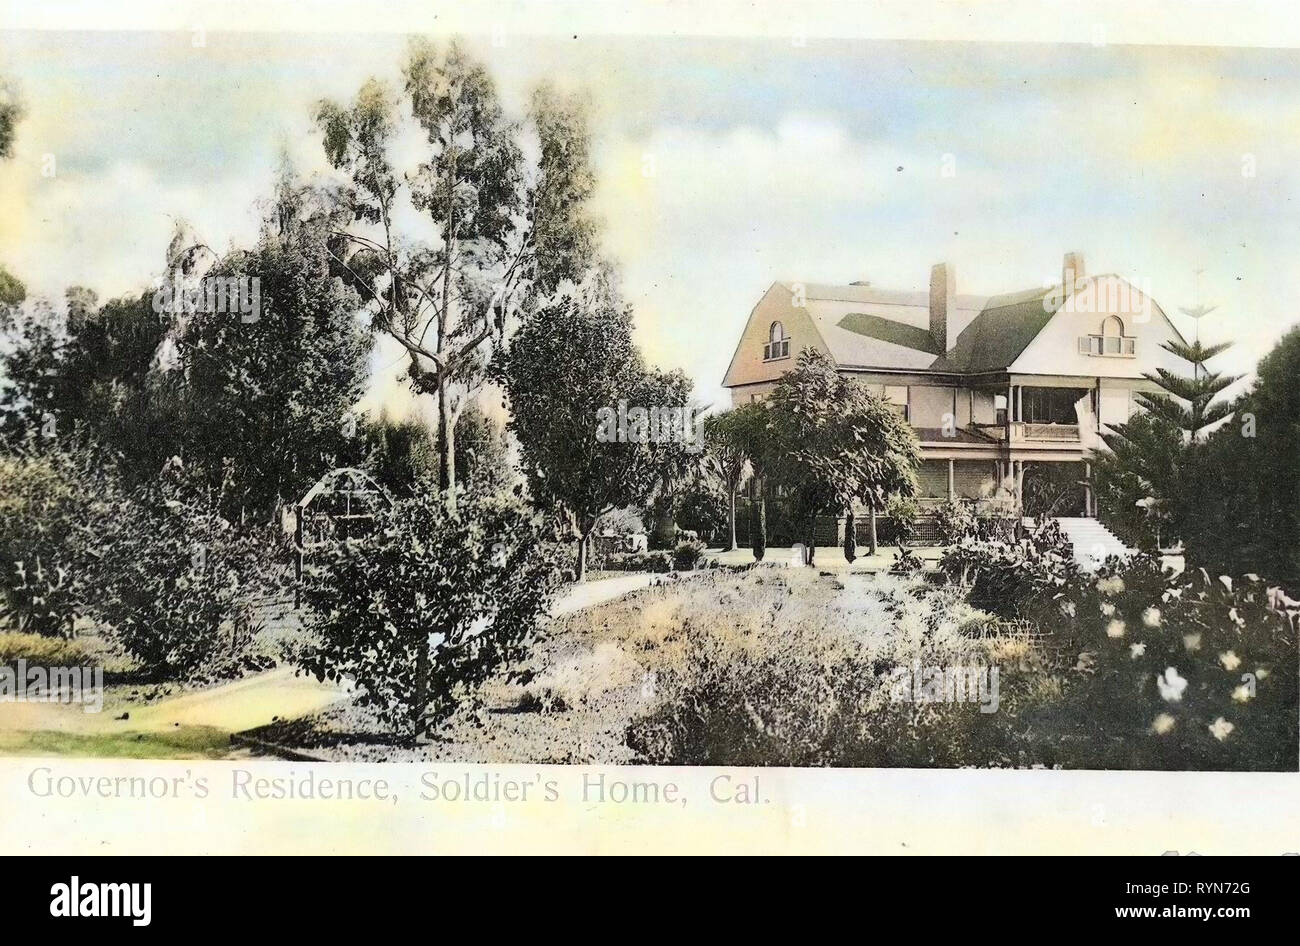 Buildings in California, 1905, California, Soldier`s Home, Governors Residence, Soldiers Home', United States of America Stock Photo